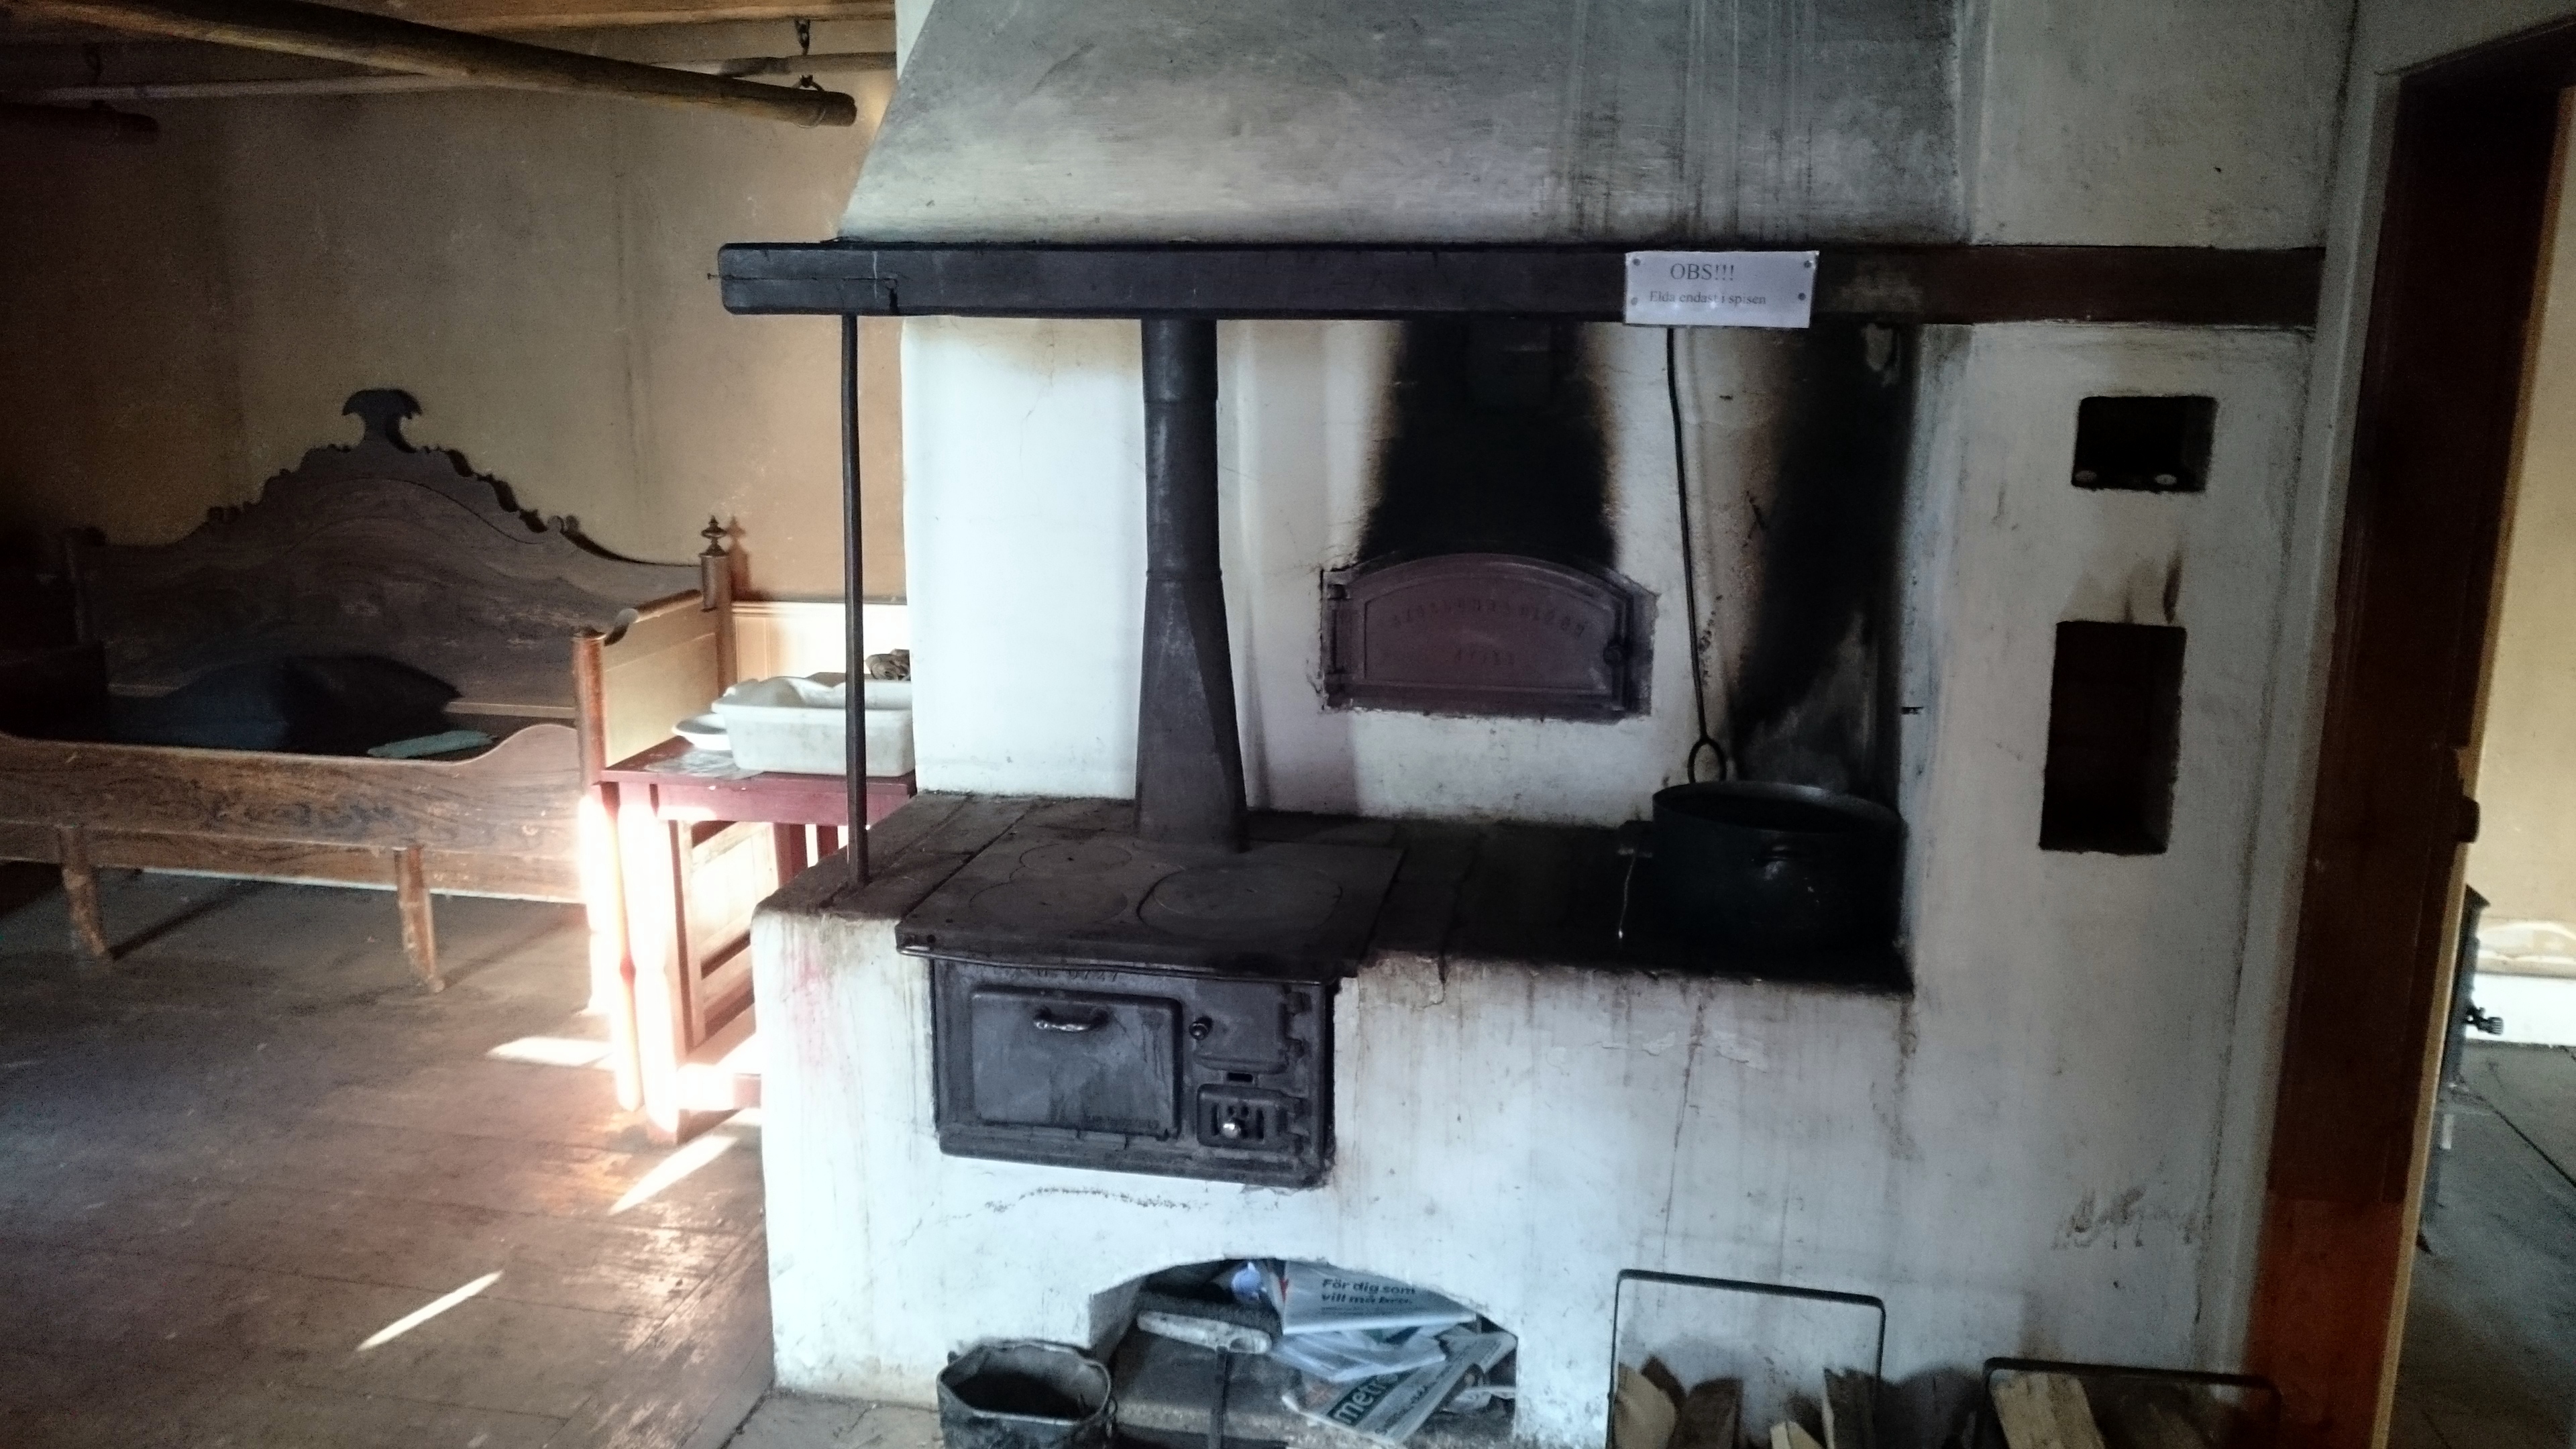 Stove and oven in Lunsentorpet